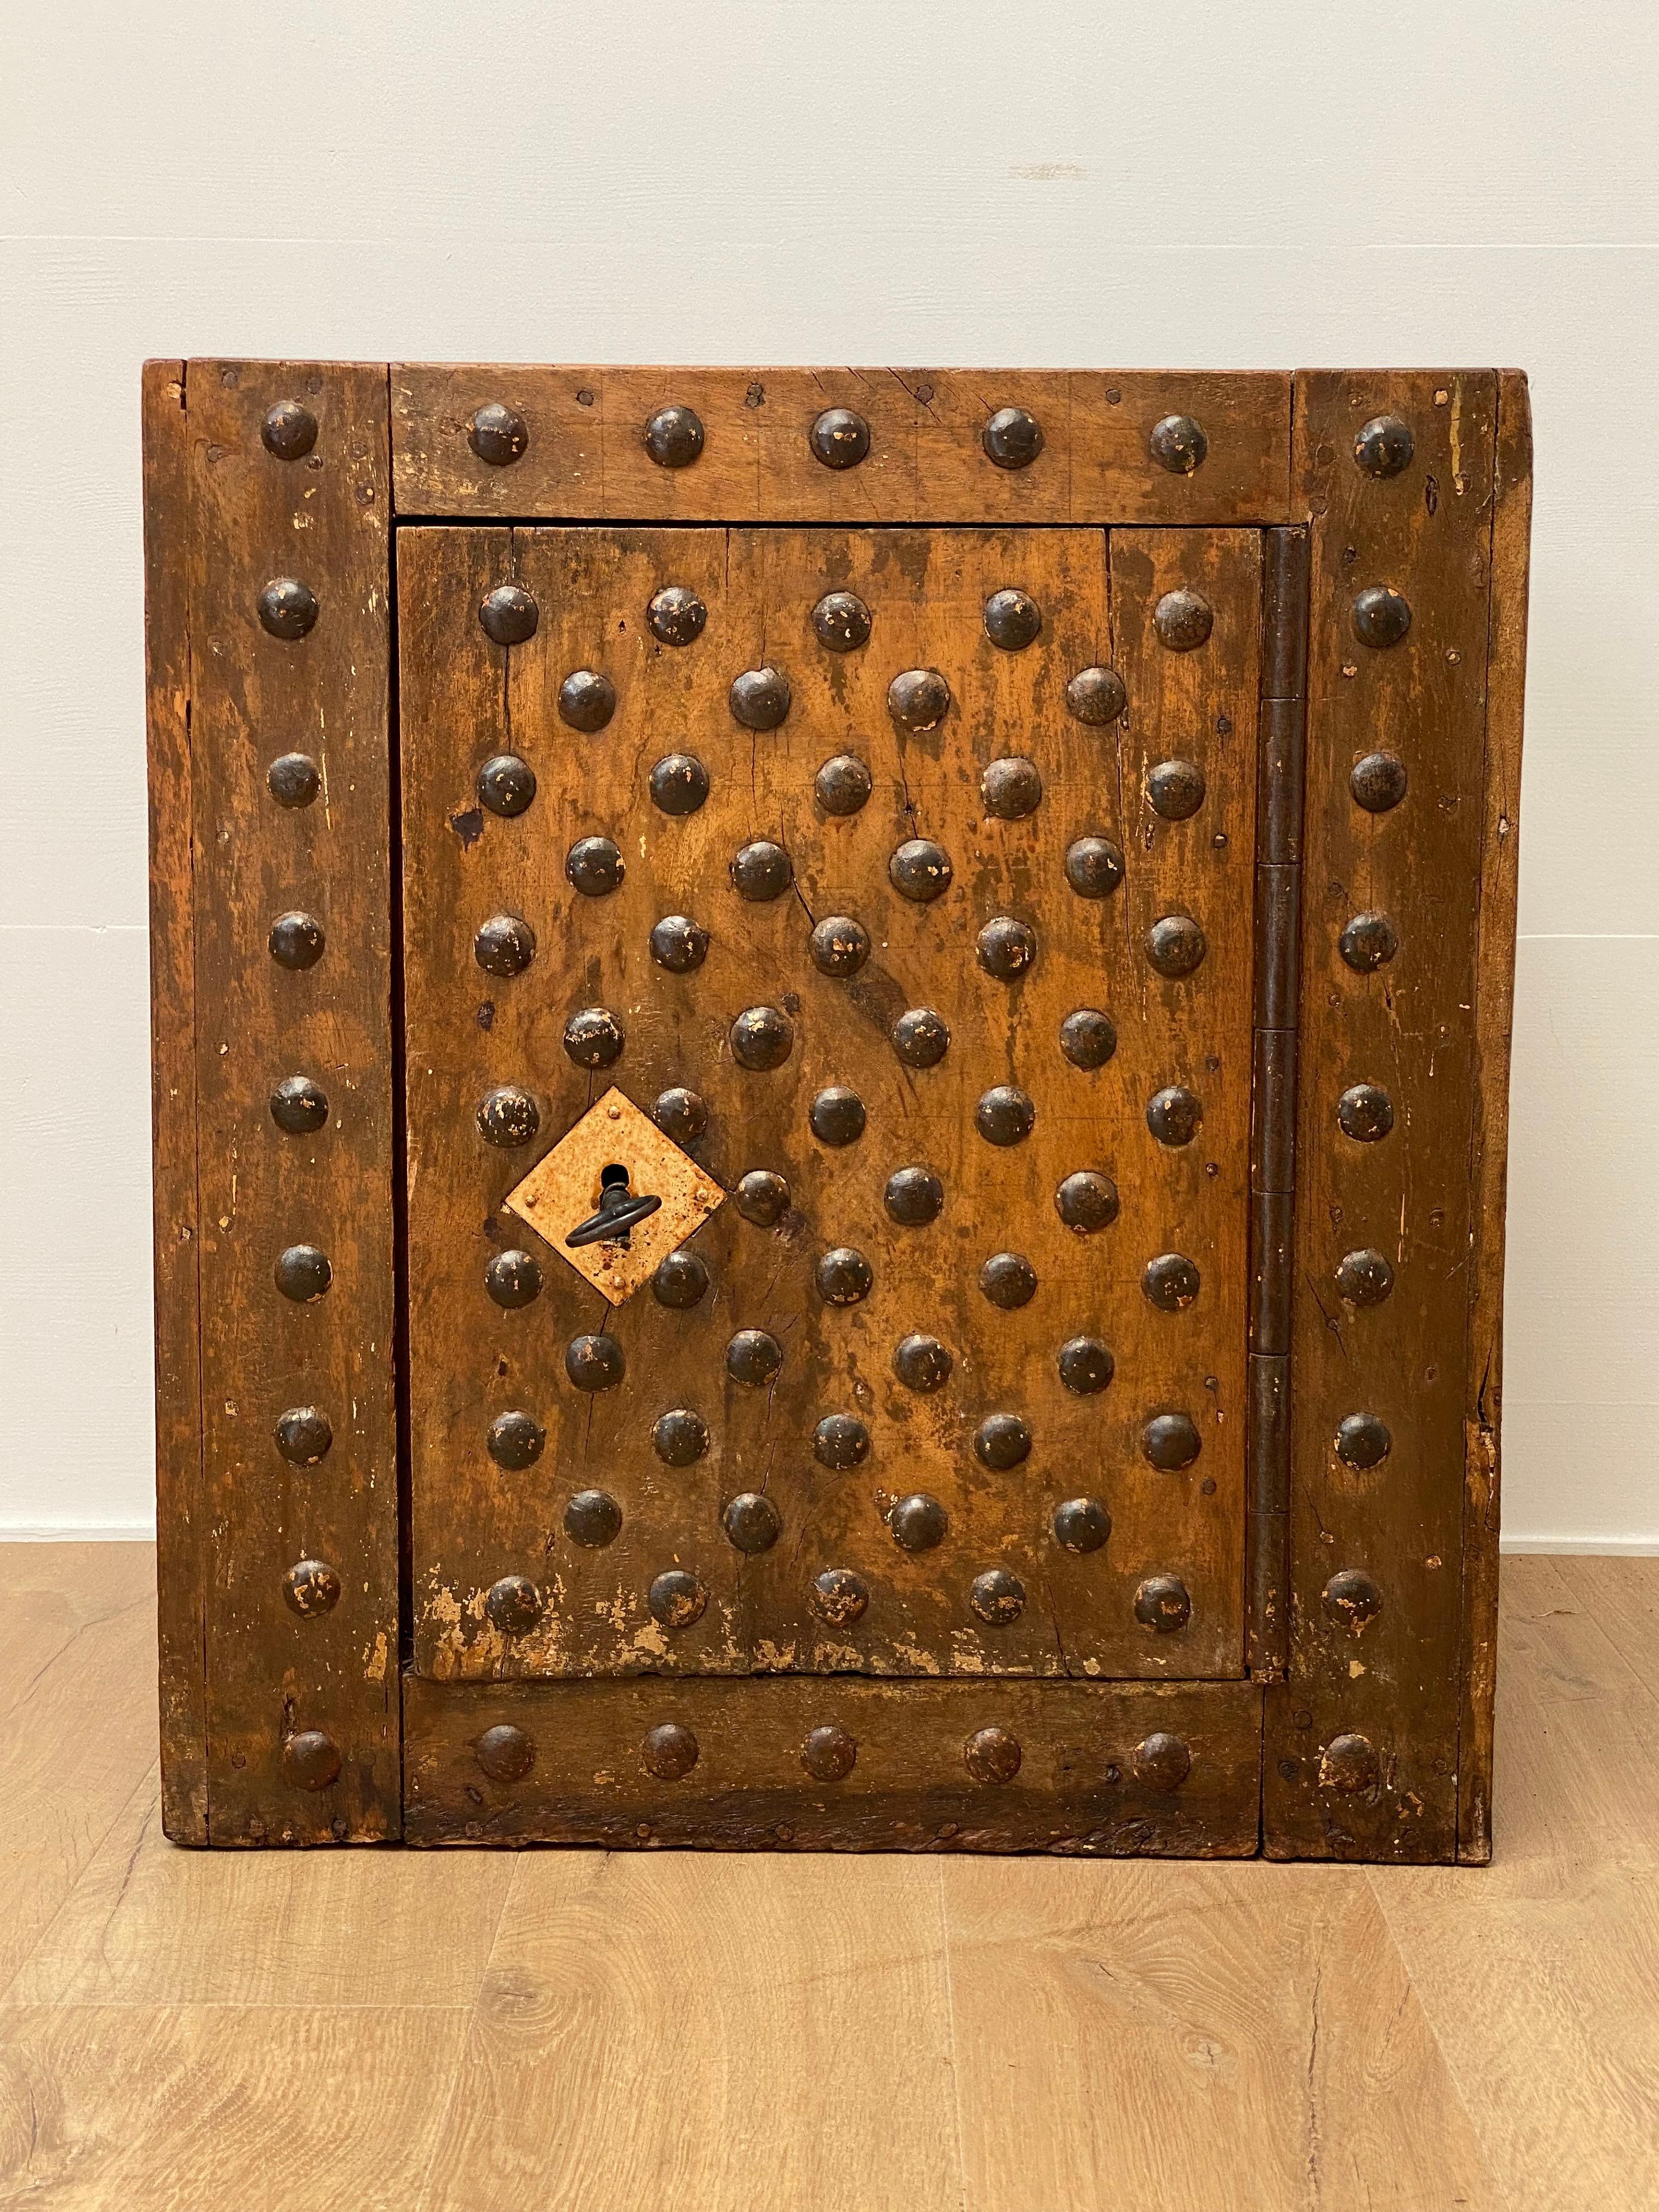 Elegant Northern Italian One door Safe from the 18Th Century,
the safe has a Walnut structure with a dense and architeceturally ordered series
of Iron head nails, one lock and key,
very decorative piece of furniture